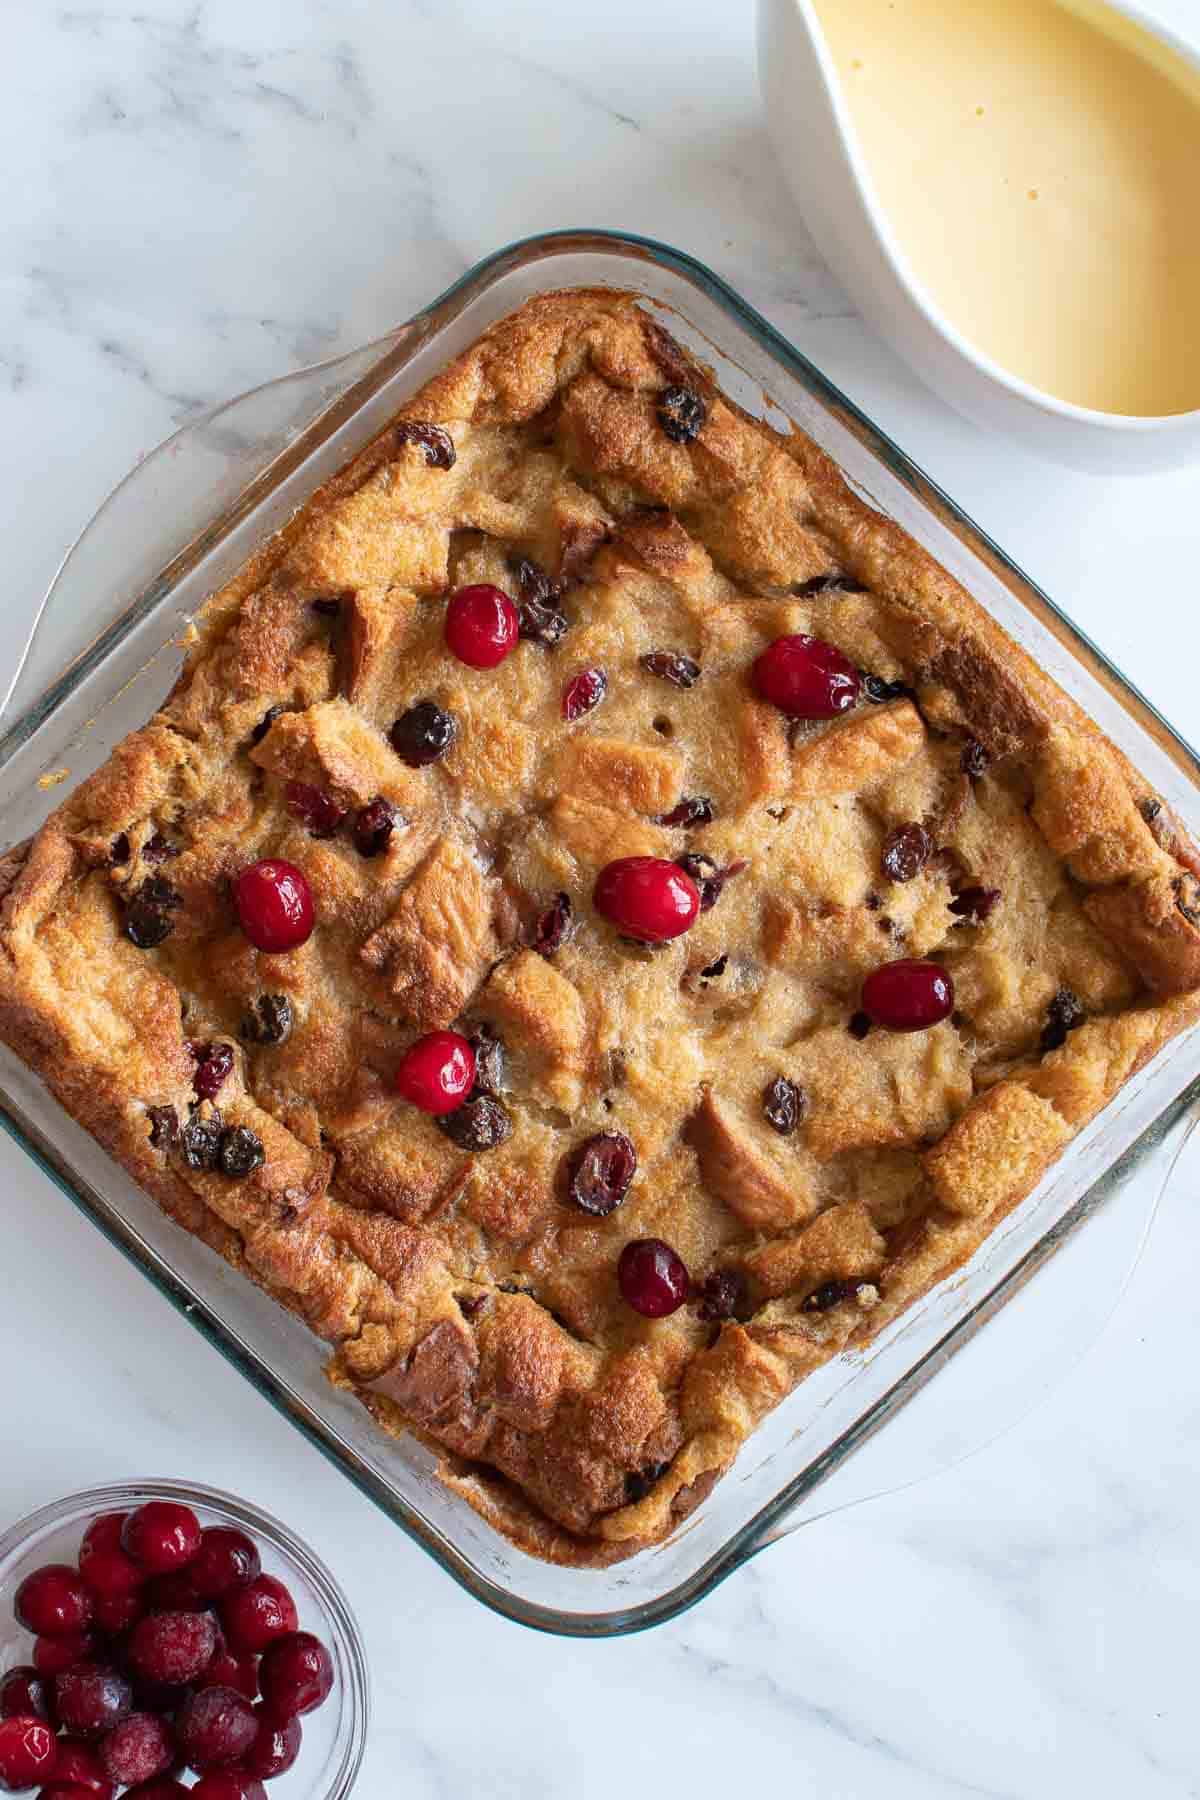 Bread pudding with eggnog, with cranberries and custard on the side.